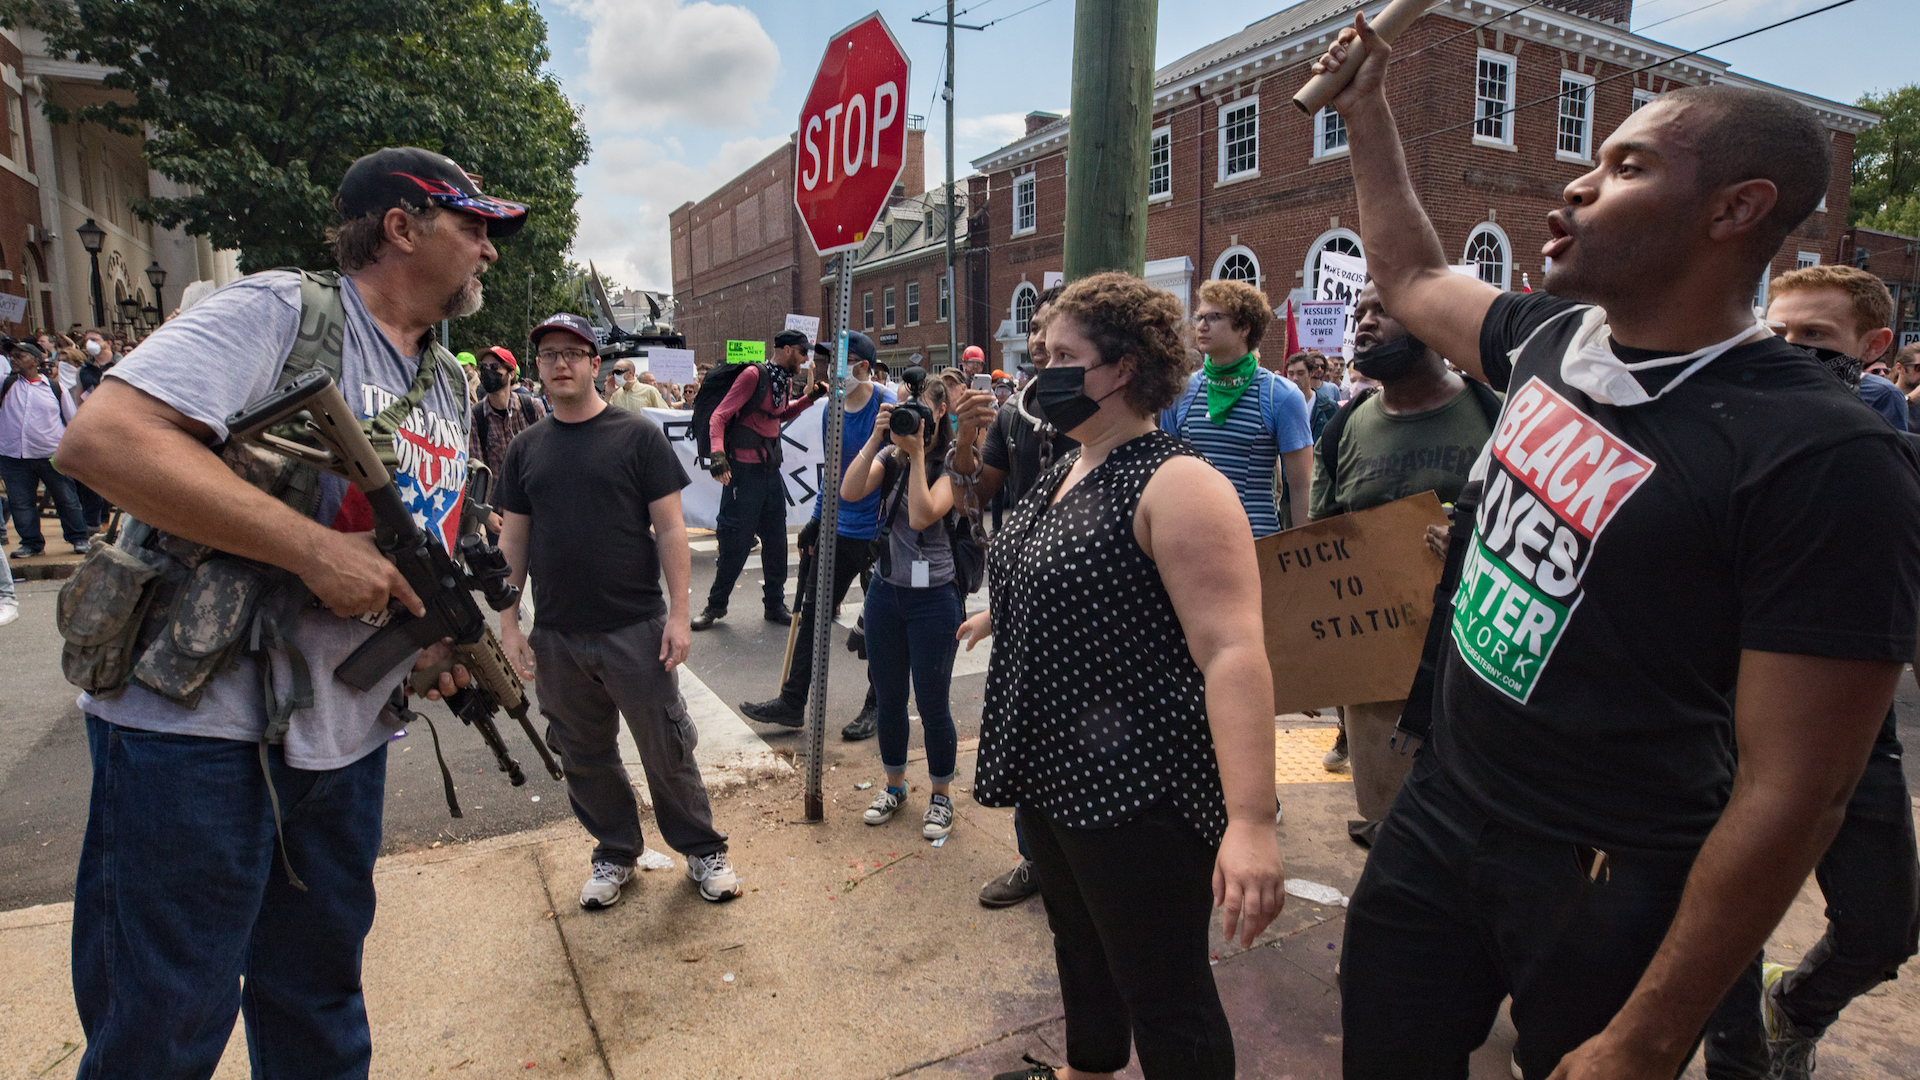 Clashes at the Unite the Right rally in Charlottesville, VA, August 12, 2017. (Evelyn Hockstein&mdash;The Washington Post/Getty Images)